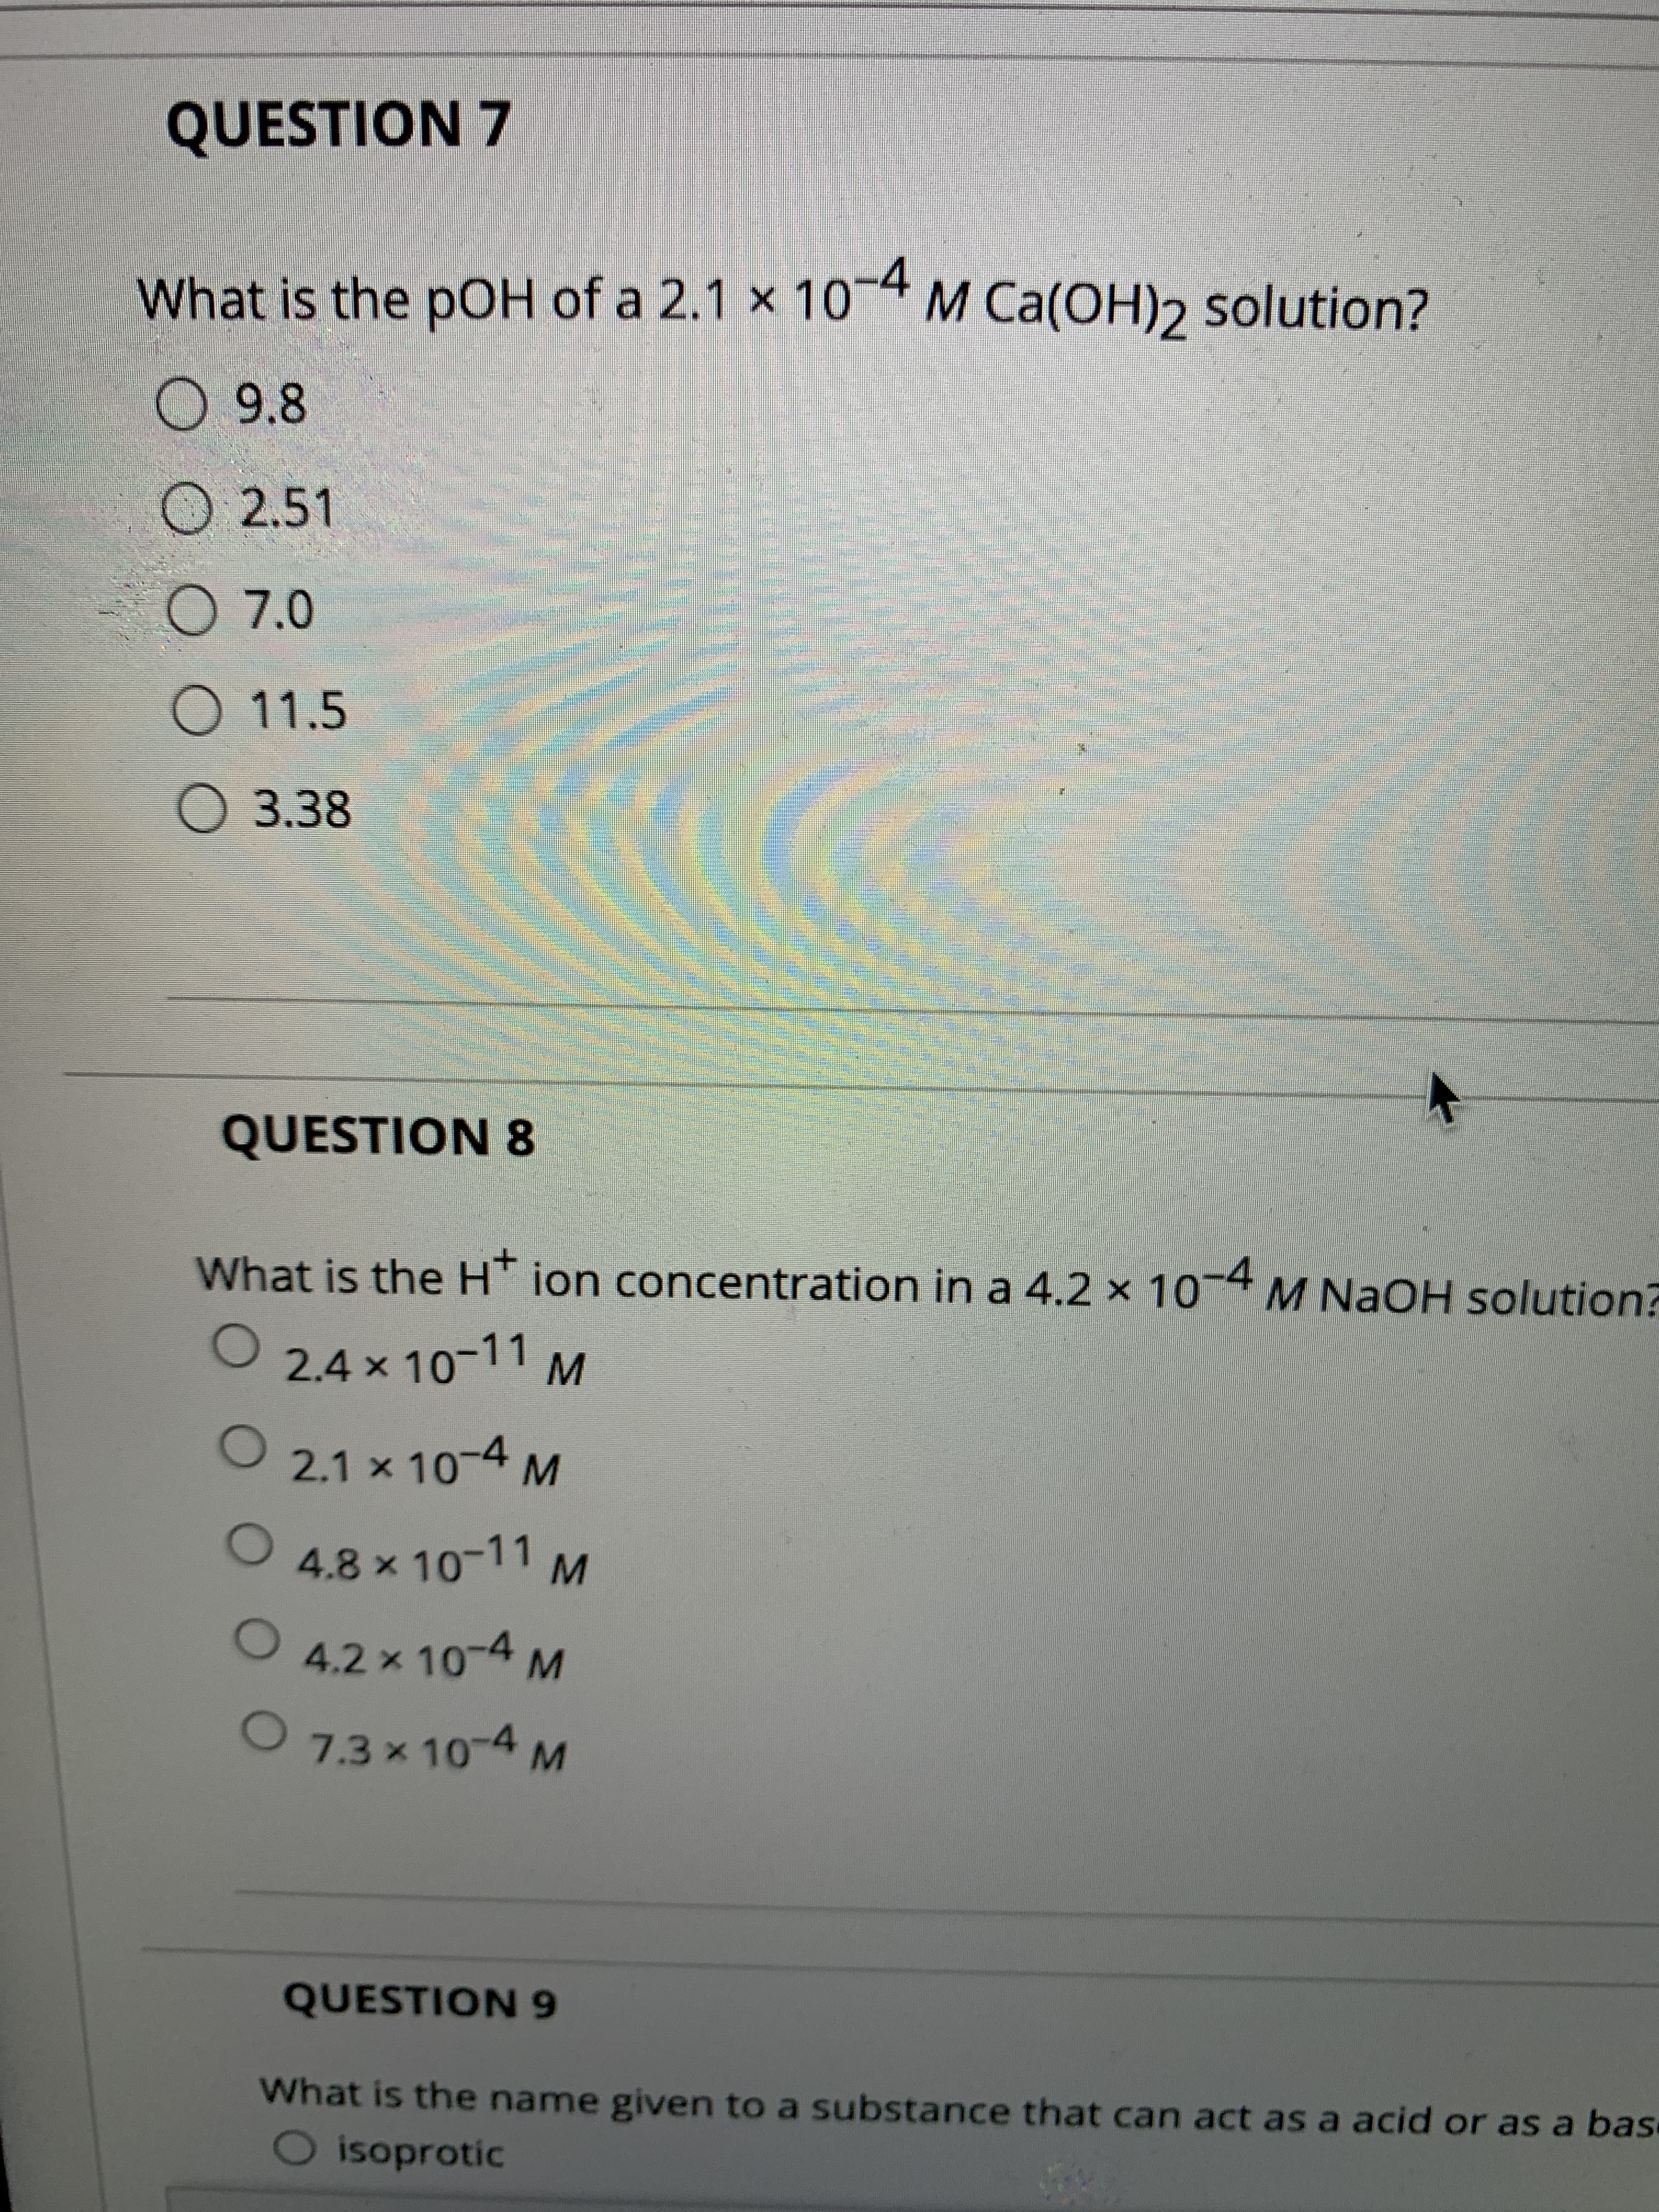 What is the pOH of a 2.1 x 10-4
M Ca(OH)2 solution?
